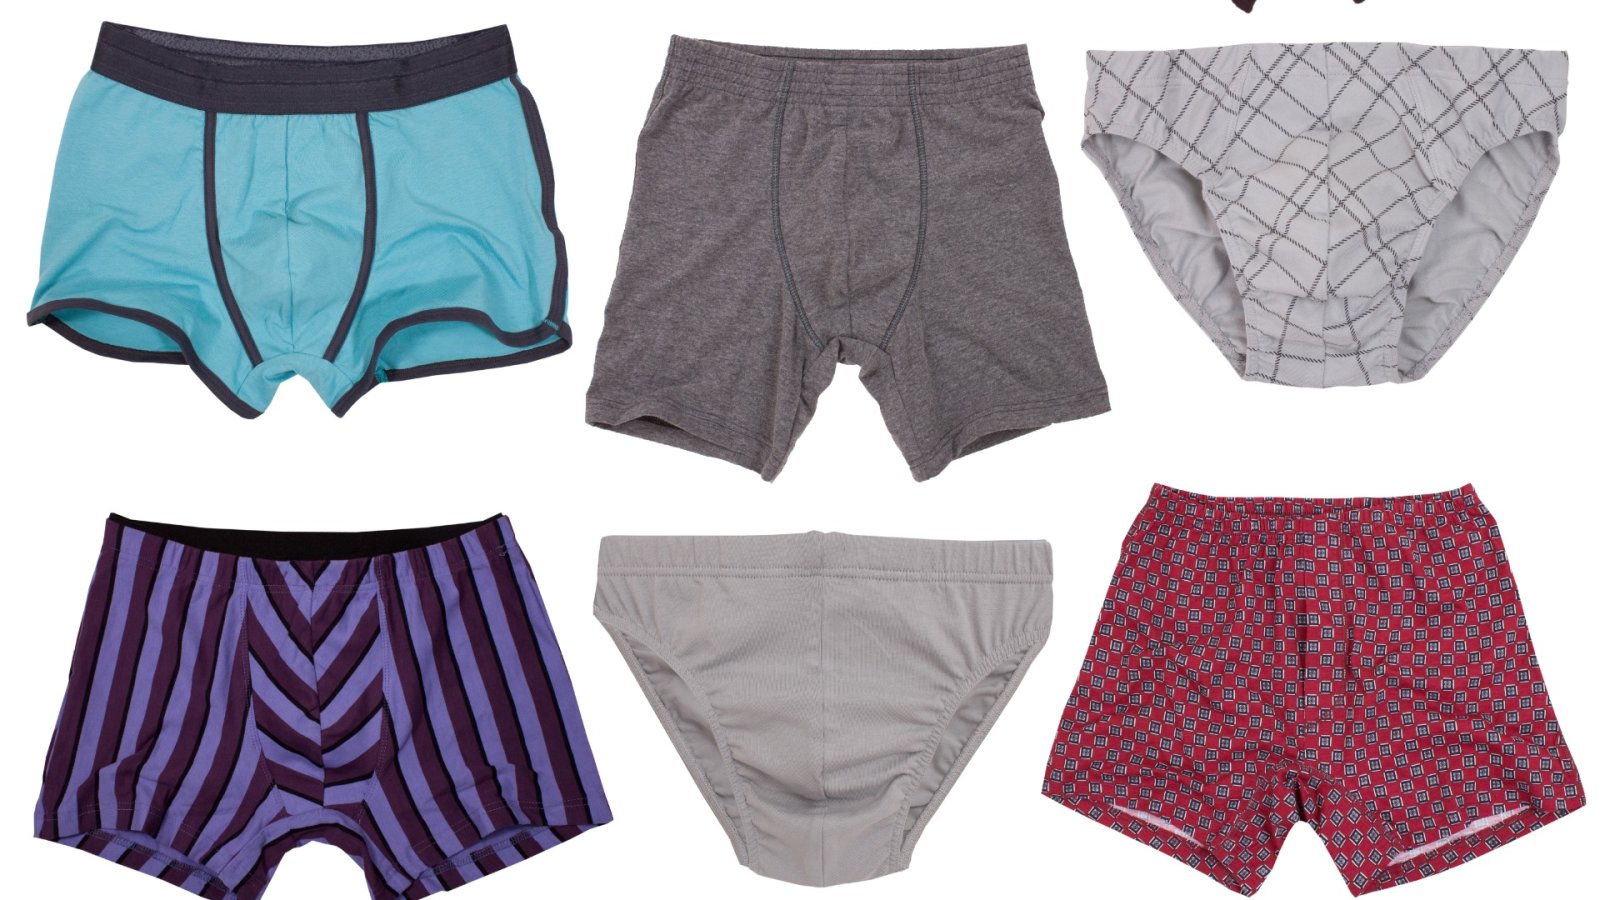 The evolution of men's underwear: from ancient times to modern styles